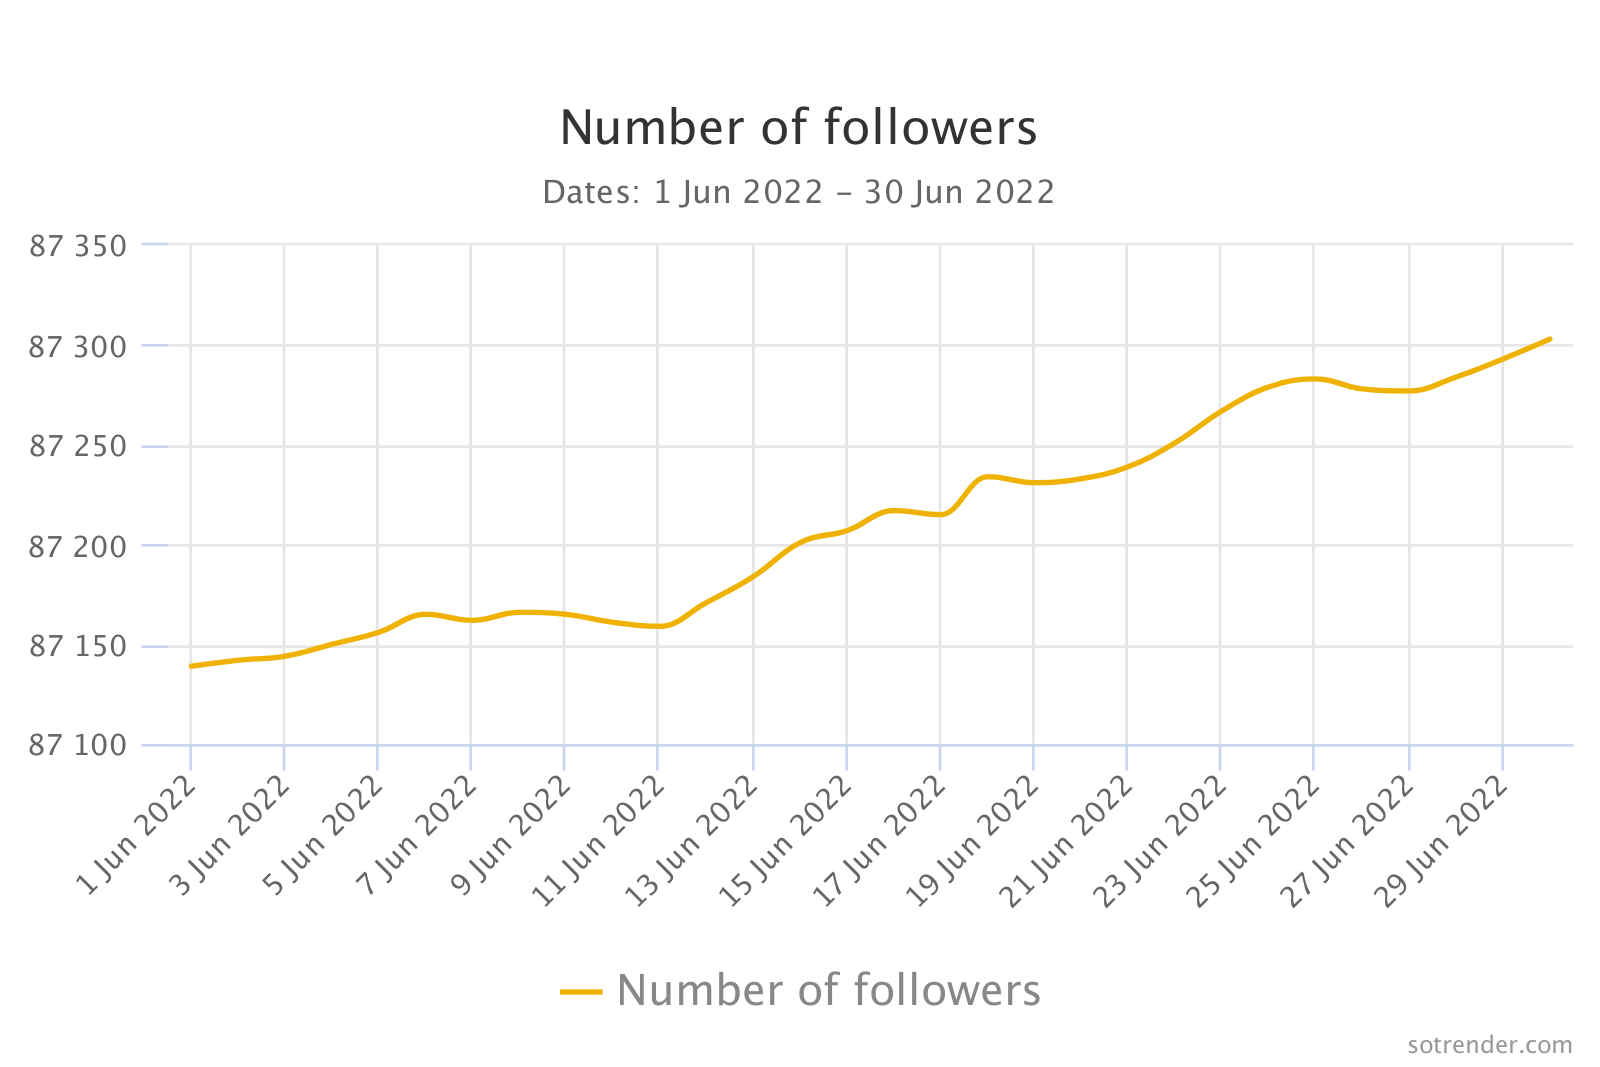 number of followers on twitter